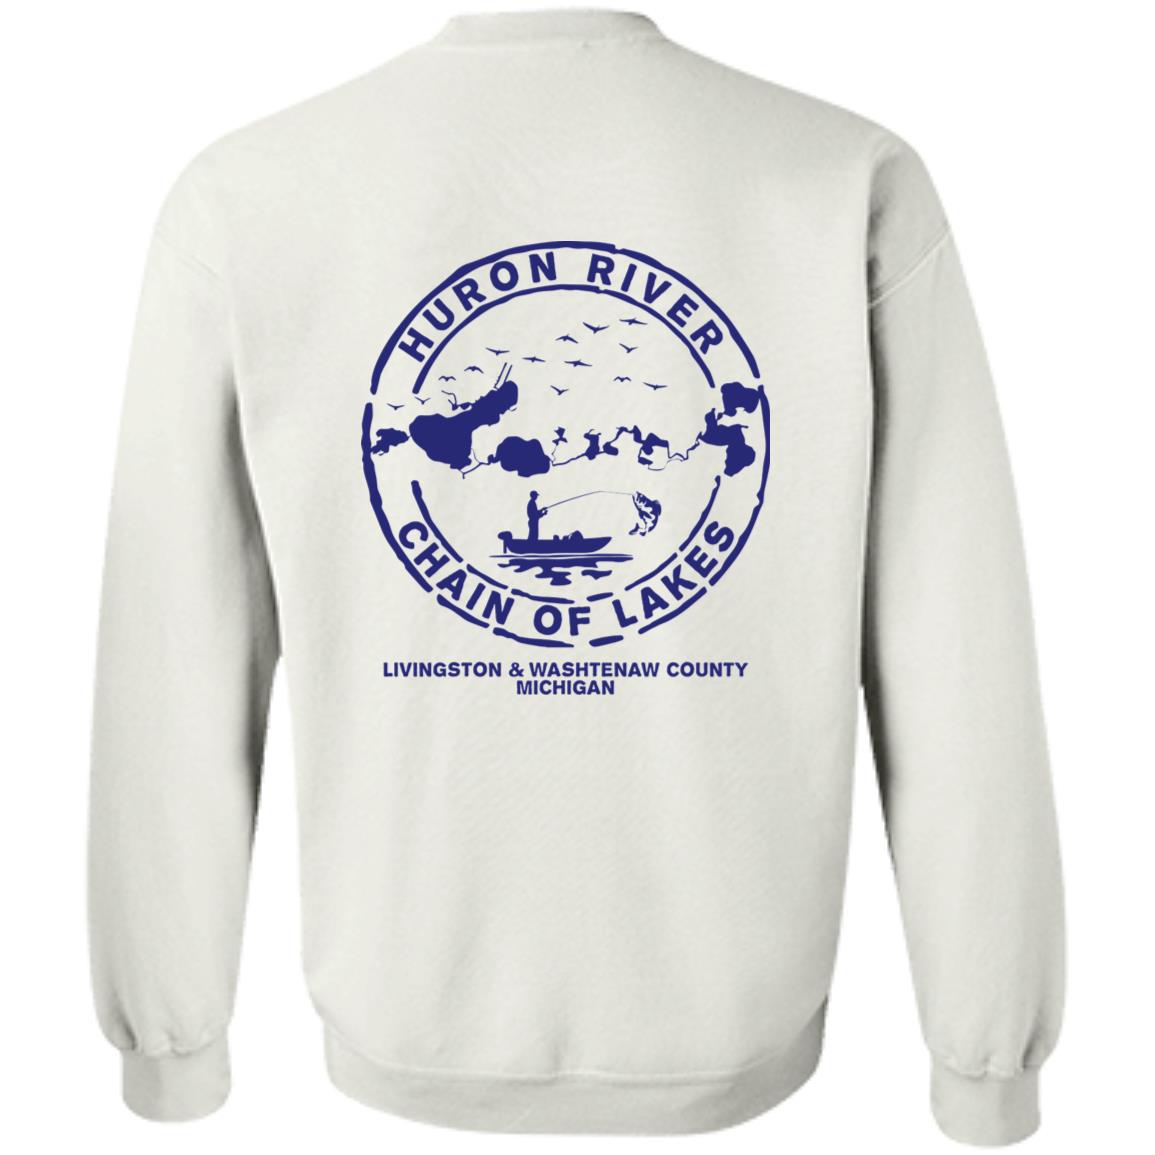 HRCL FL - Navy Rock Out with your Prop Out - 2 Sided G180 Crewneck Pullover Sweatshirt